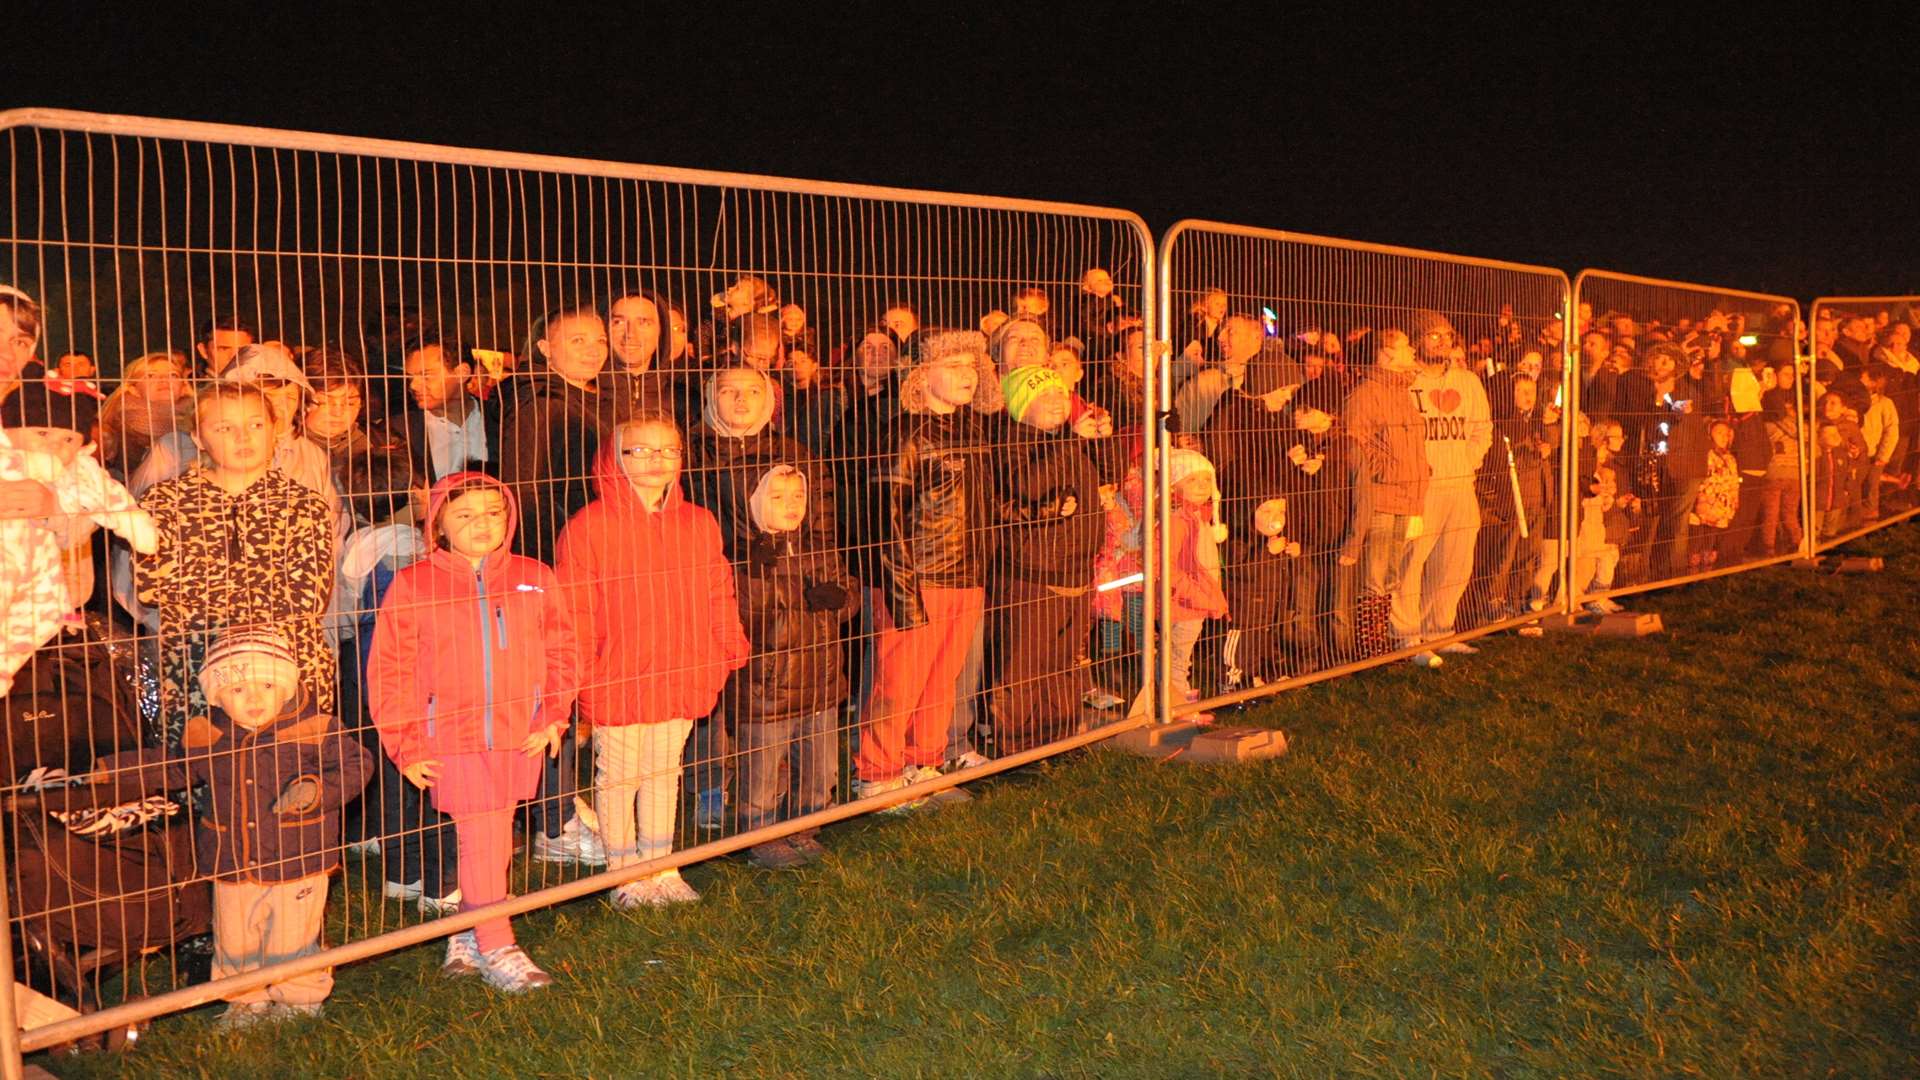 People line the fences to see the bonfire at the 2014 Gillingham Fireworks Display